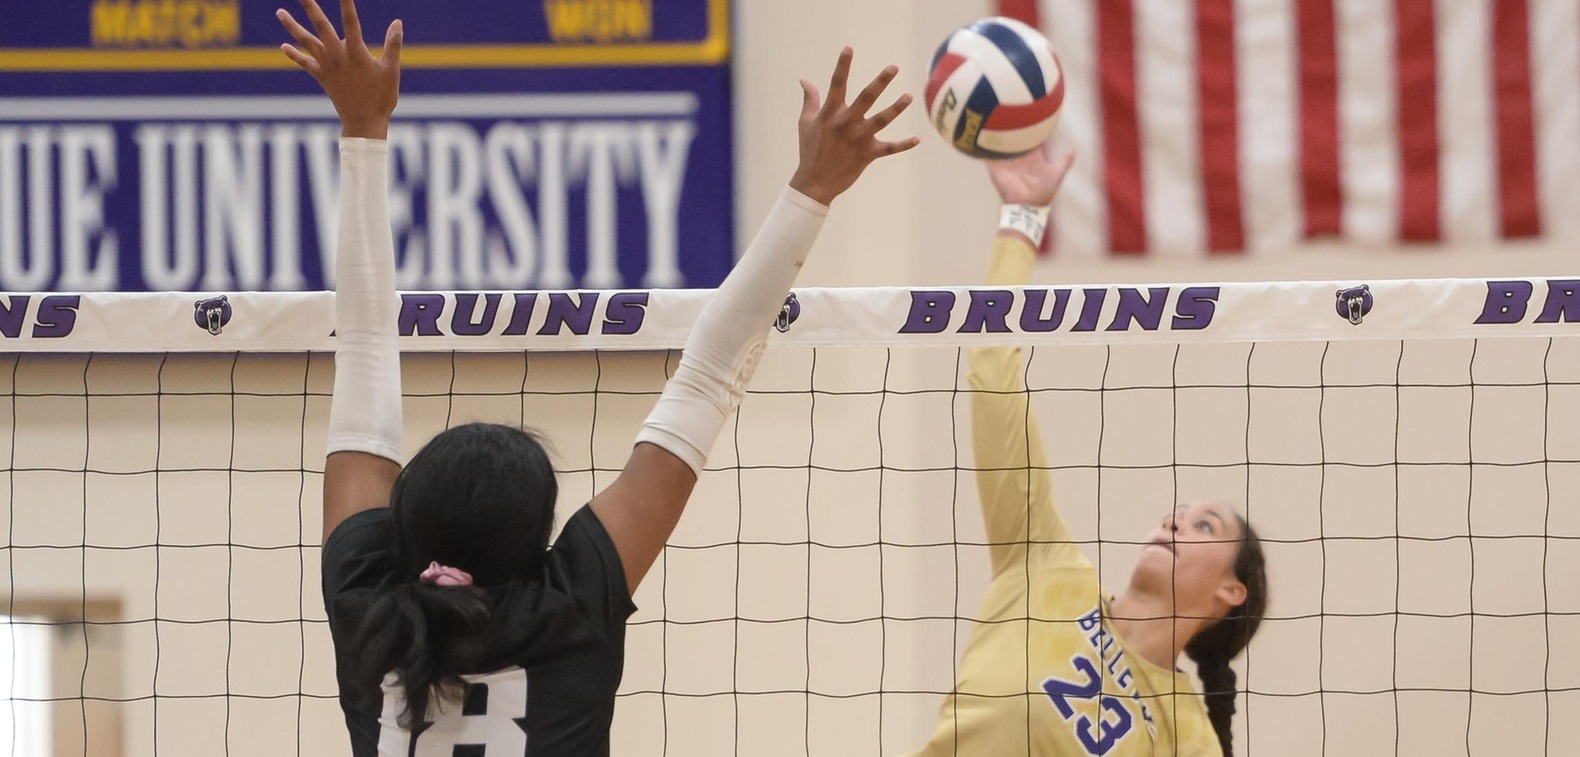 Eve Fountain led the Bruins with 16 kills and 15 digs.